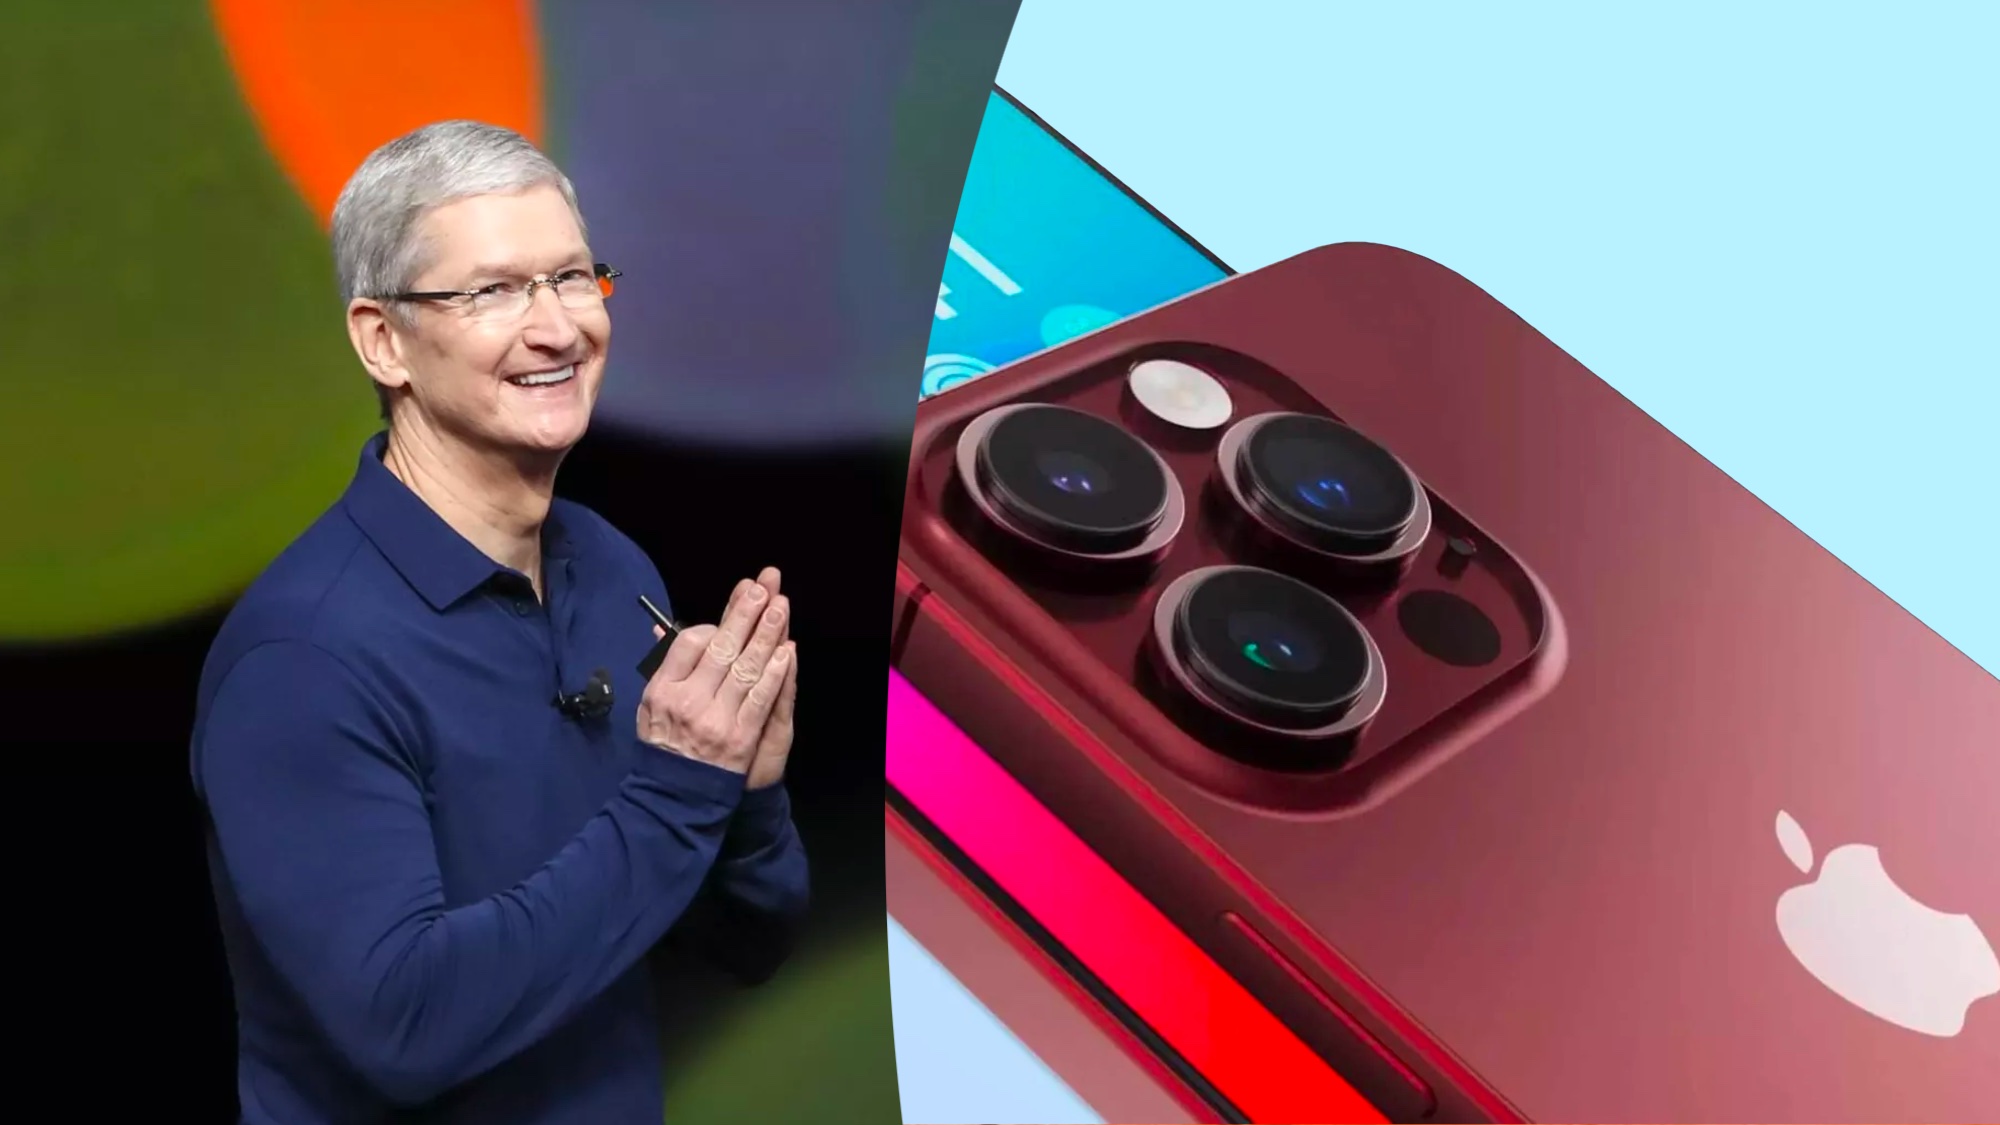 Tim Cook next to iPhone 15 Pro Max render